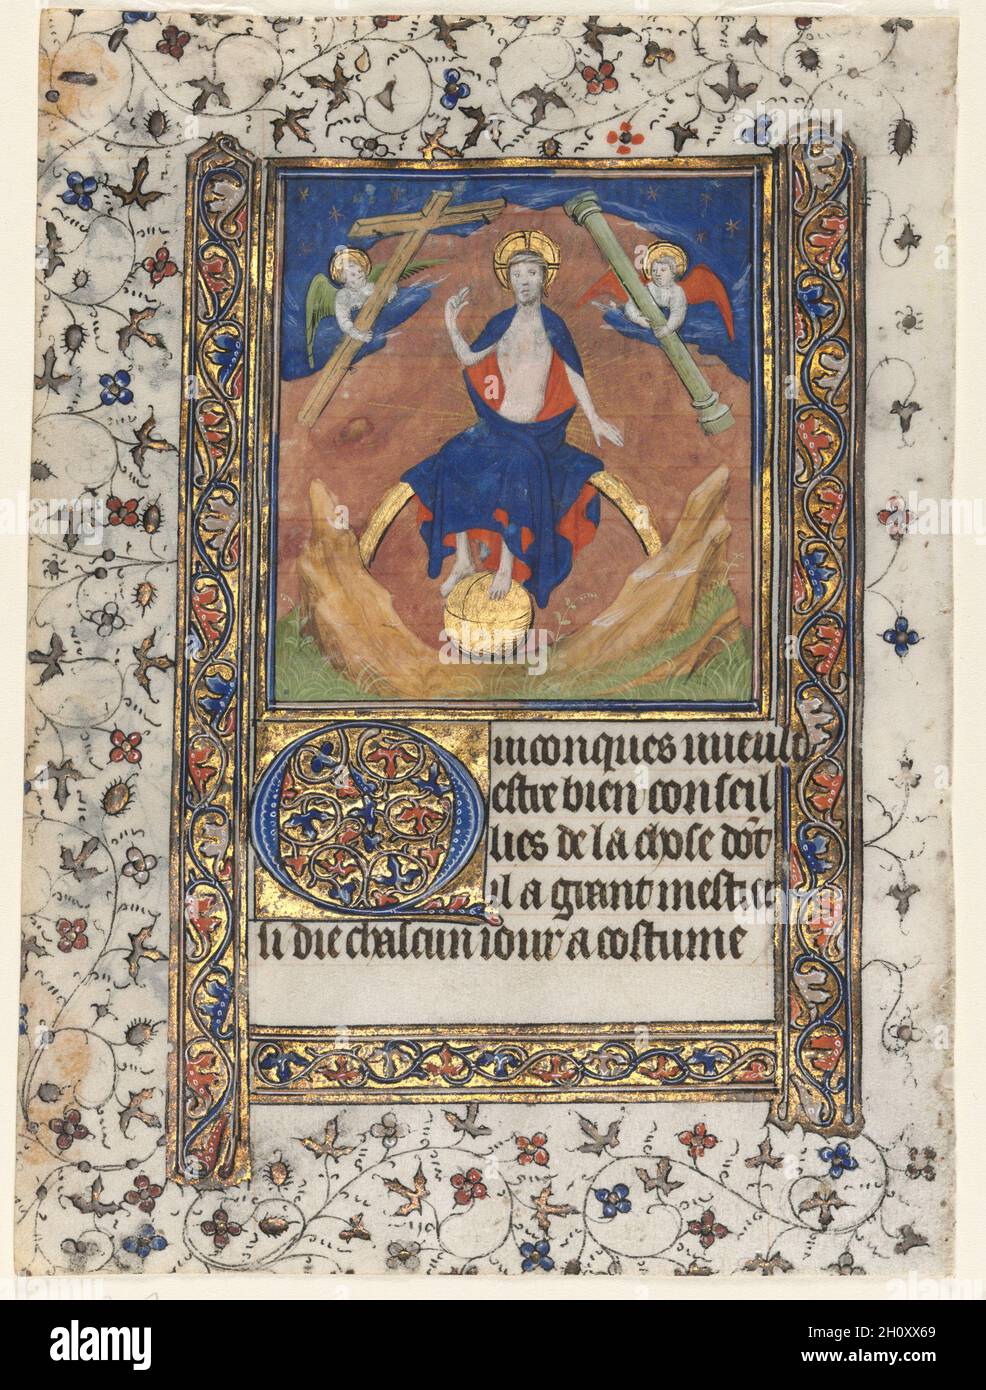 Leaf from a Book of Hours: Christ in Judgment, c. 1415. Workshop of Boucicaut Master (French, Paris, active about 1410-25). Ink, tempera, and gold on vellum; sheet: 17 x 12.5 cm (6 11/16 x 4 15/16 in.). Stock Photo